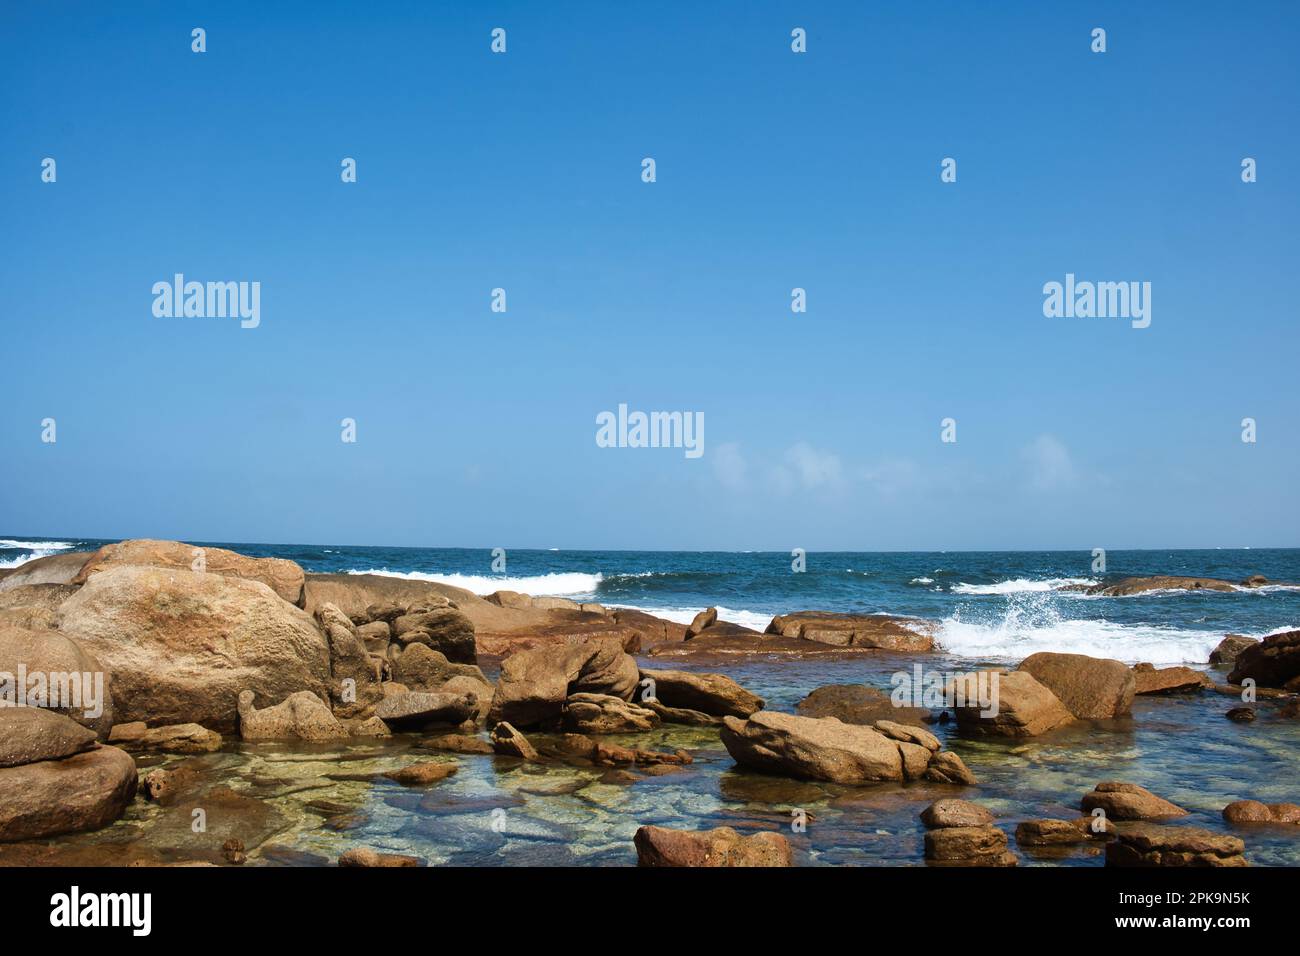 Rocky coast with eroded granite boulders, rock pools and waves at Cape Leeuwin, near Augusta in Western Australia Stock Photo